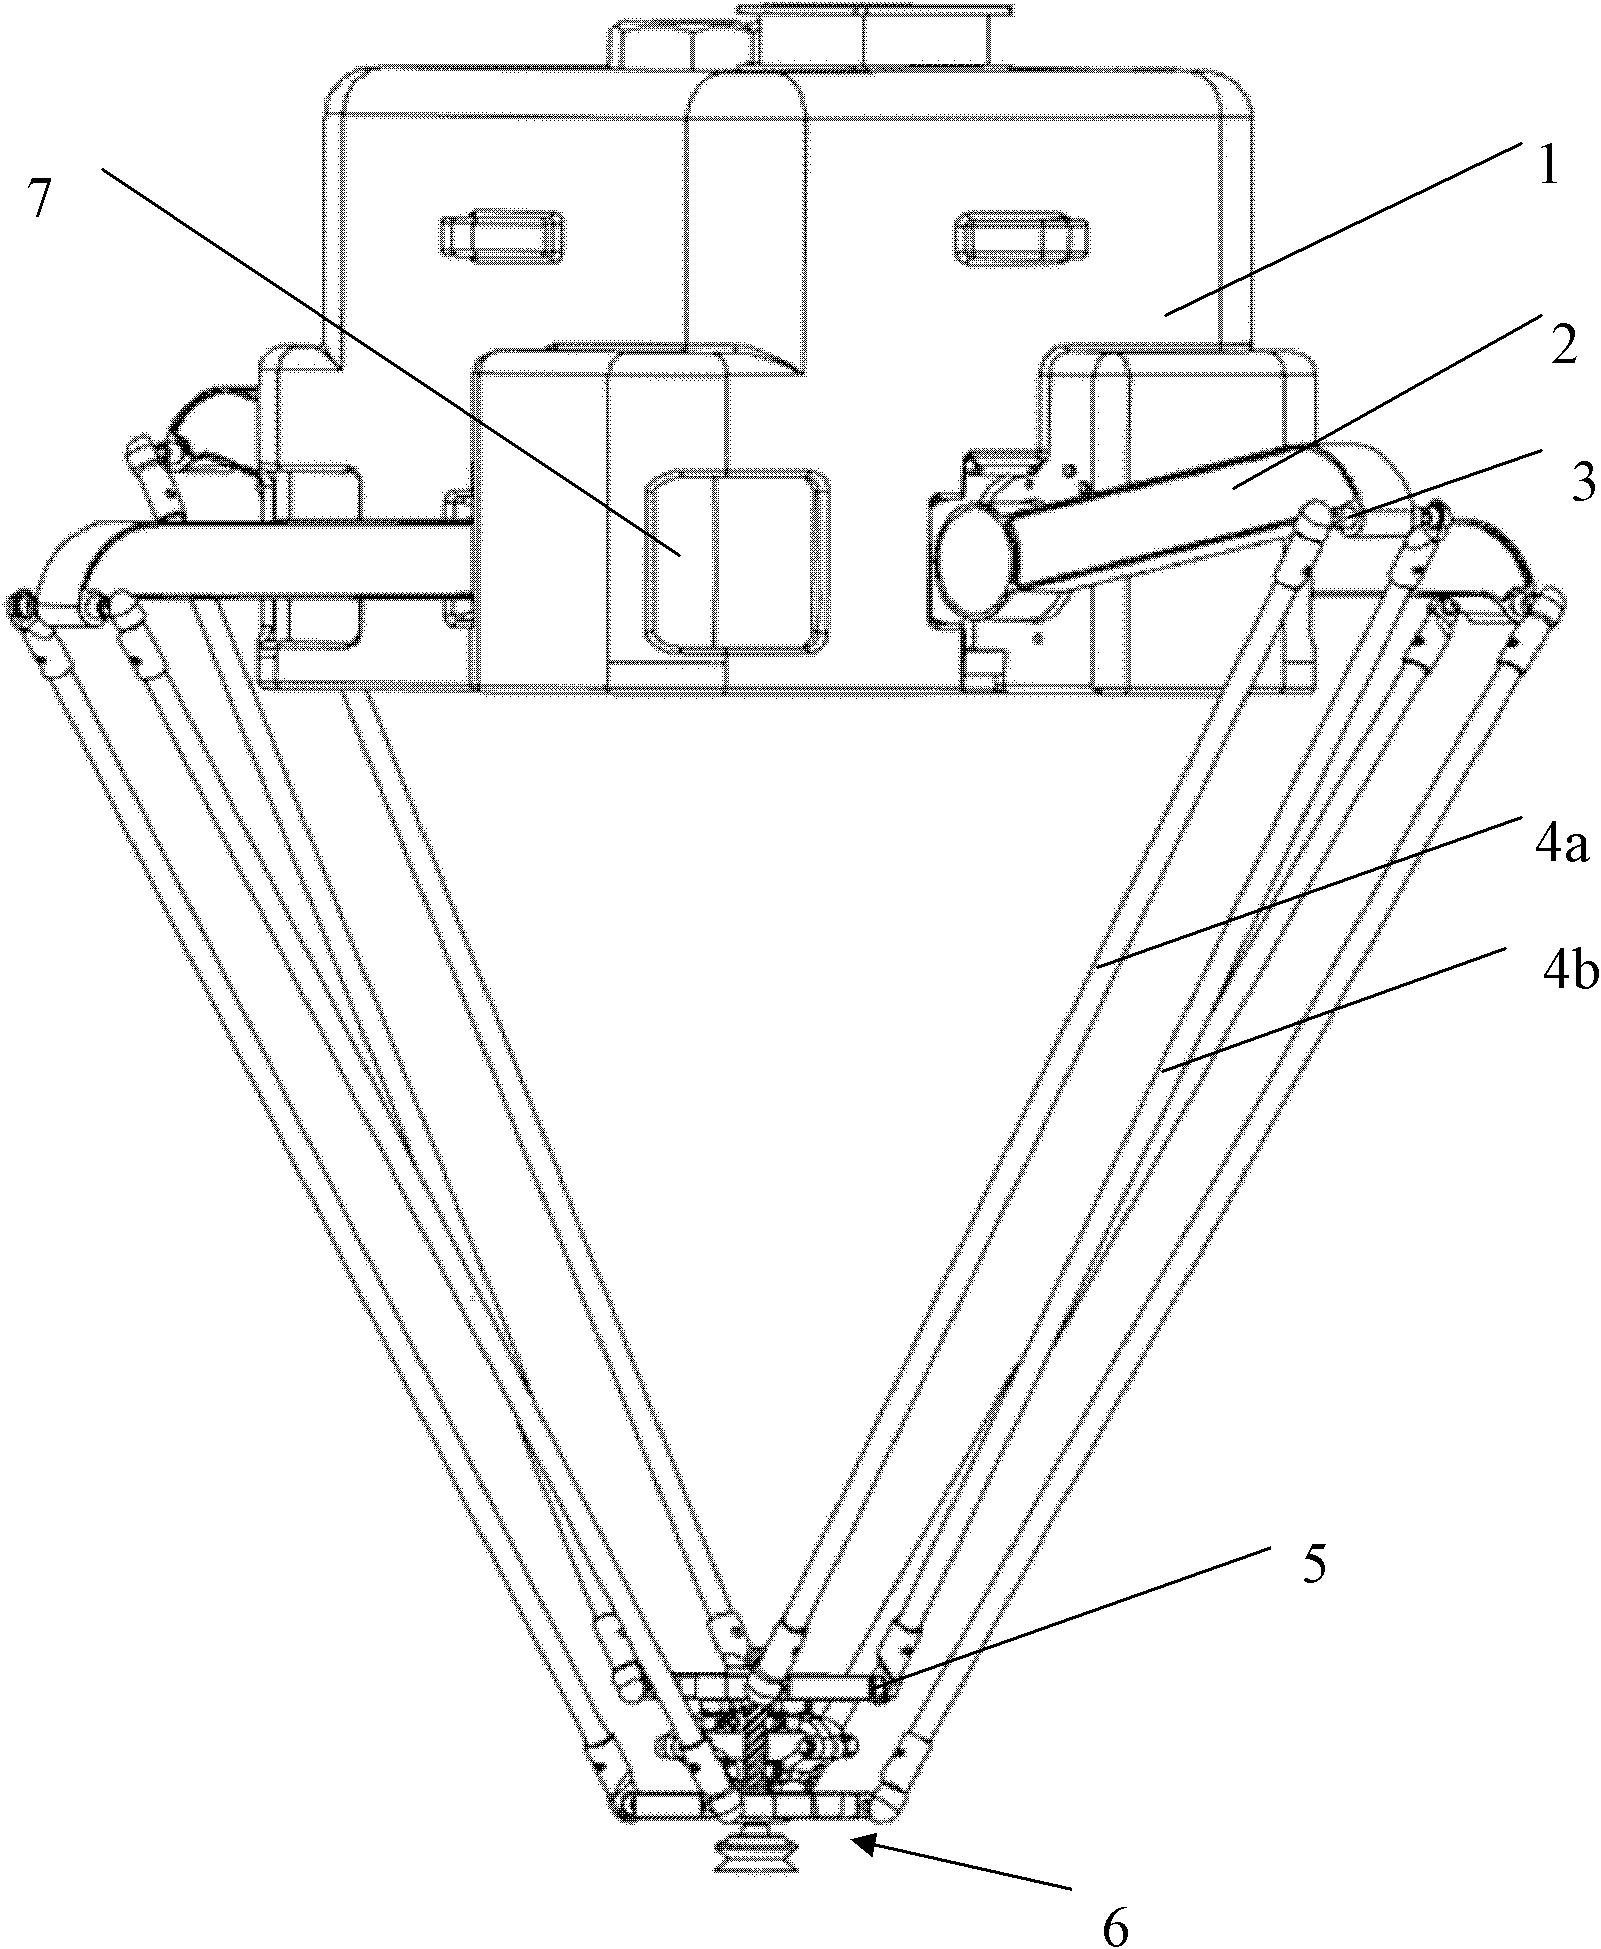 Up-and-down telescopic three-platform one-rotation parallel mechanism